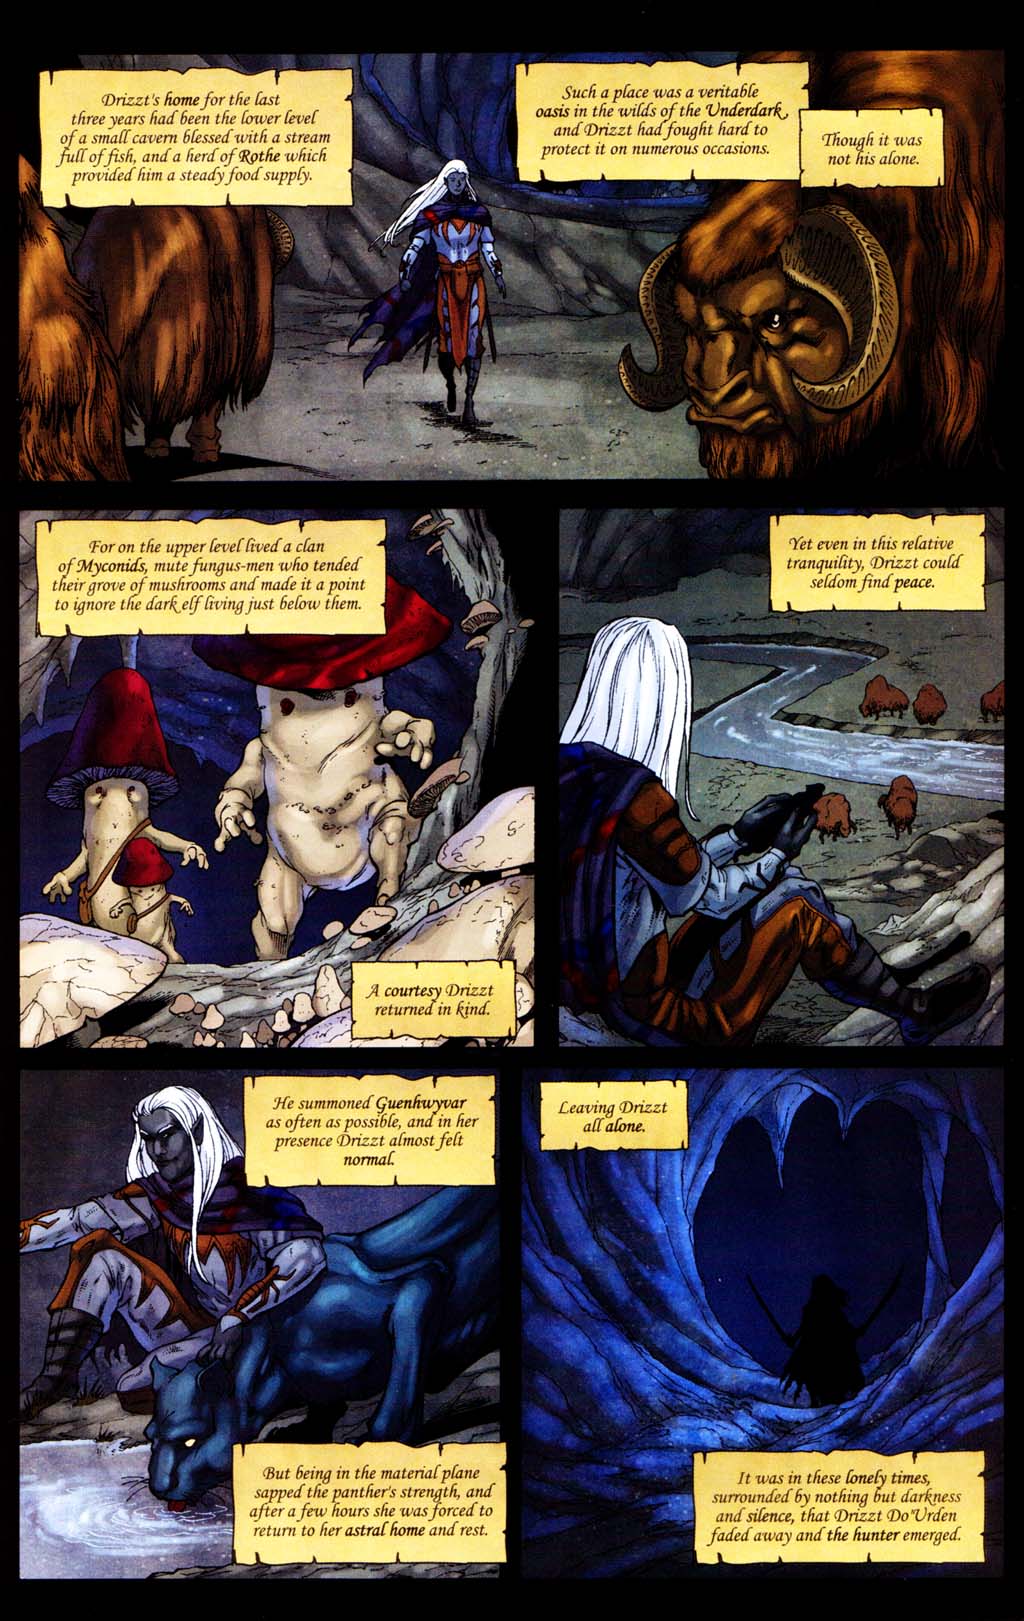 Forgotten Realms: Exile #1 - Issue #1, Part 1